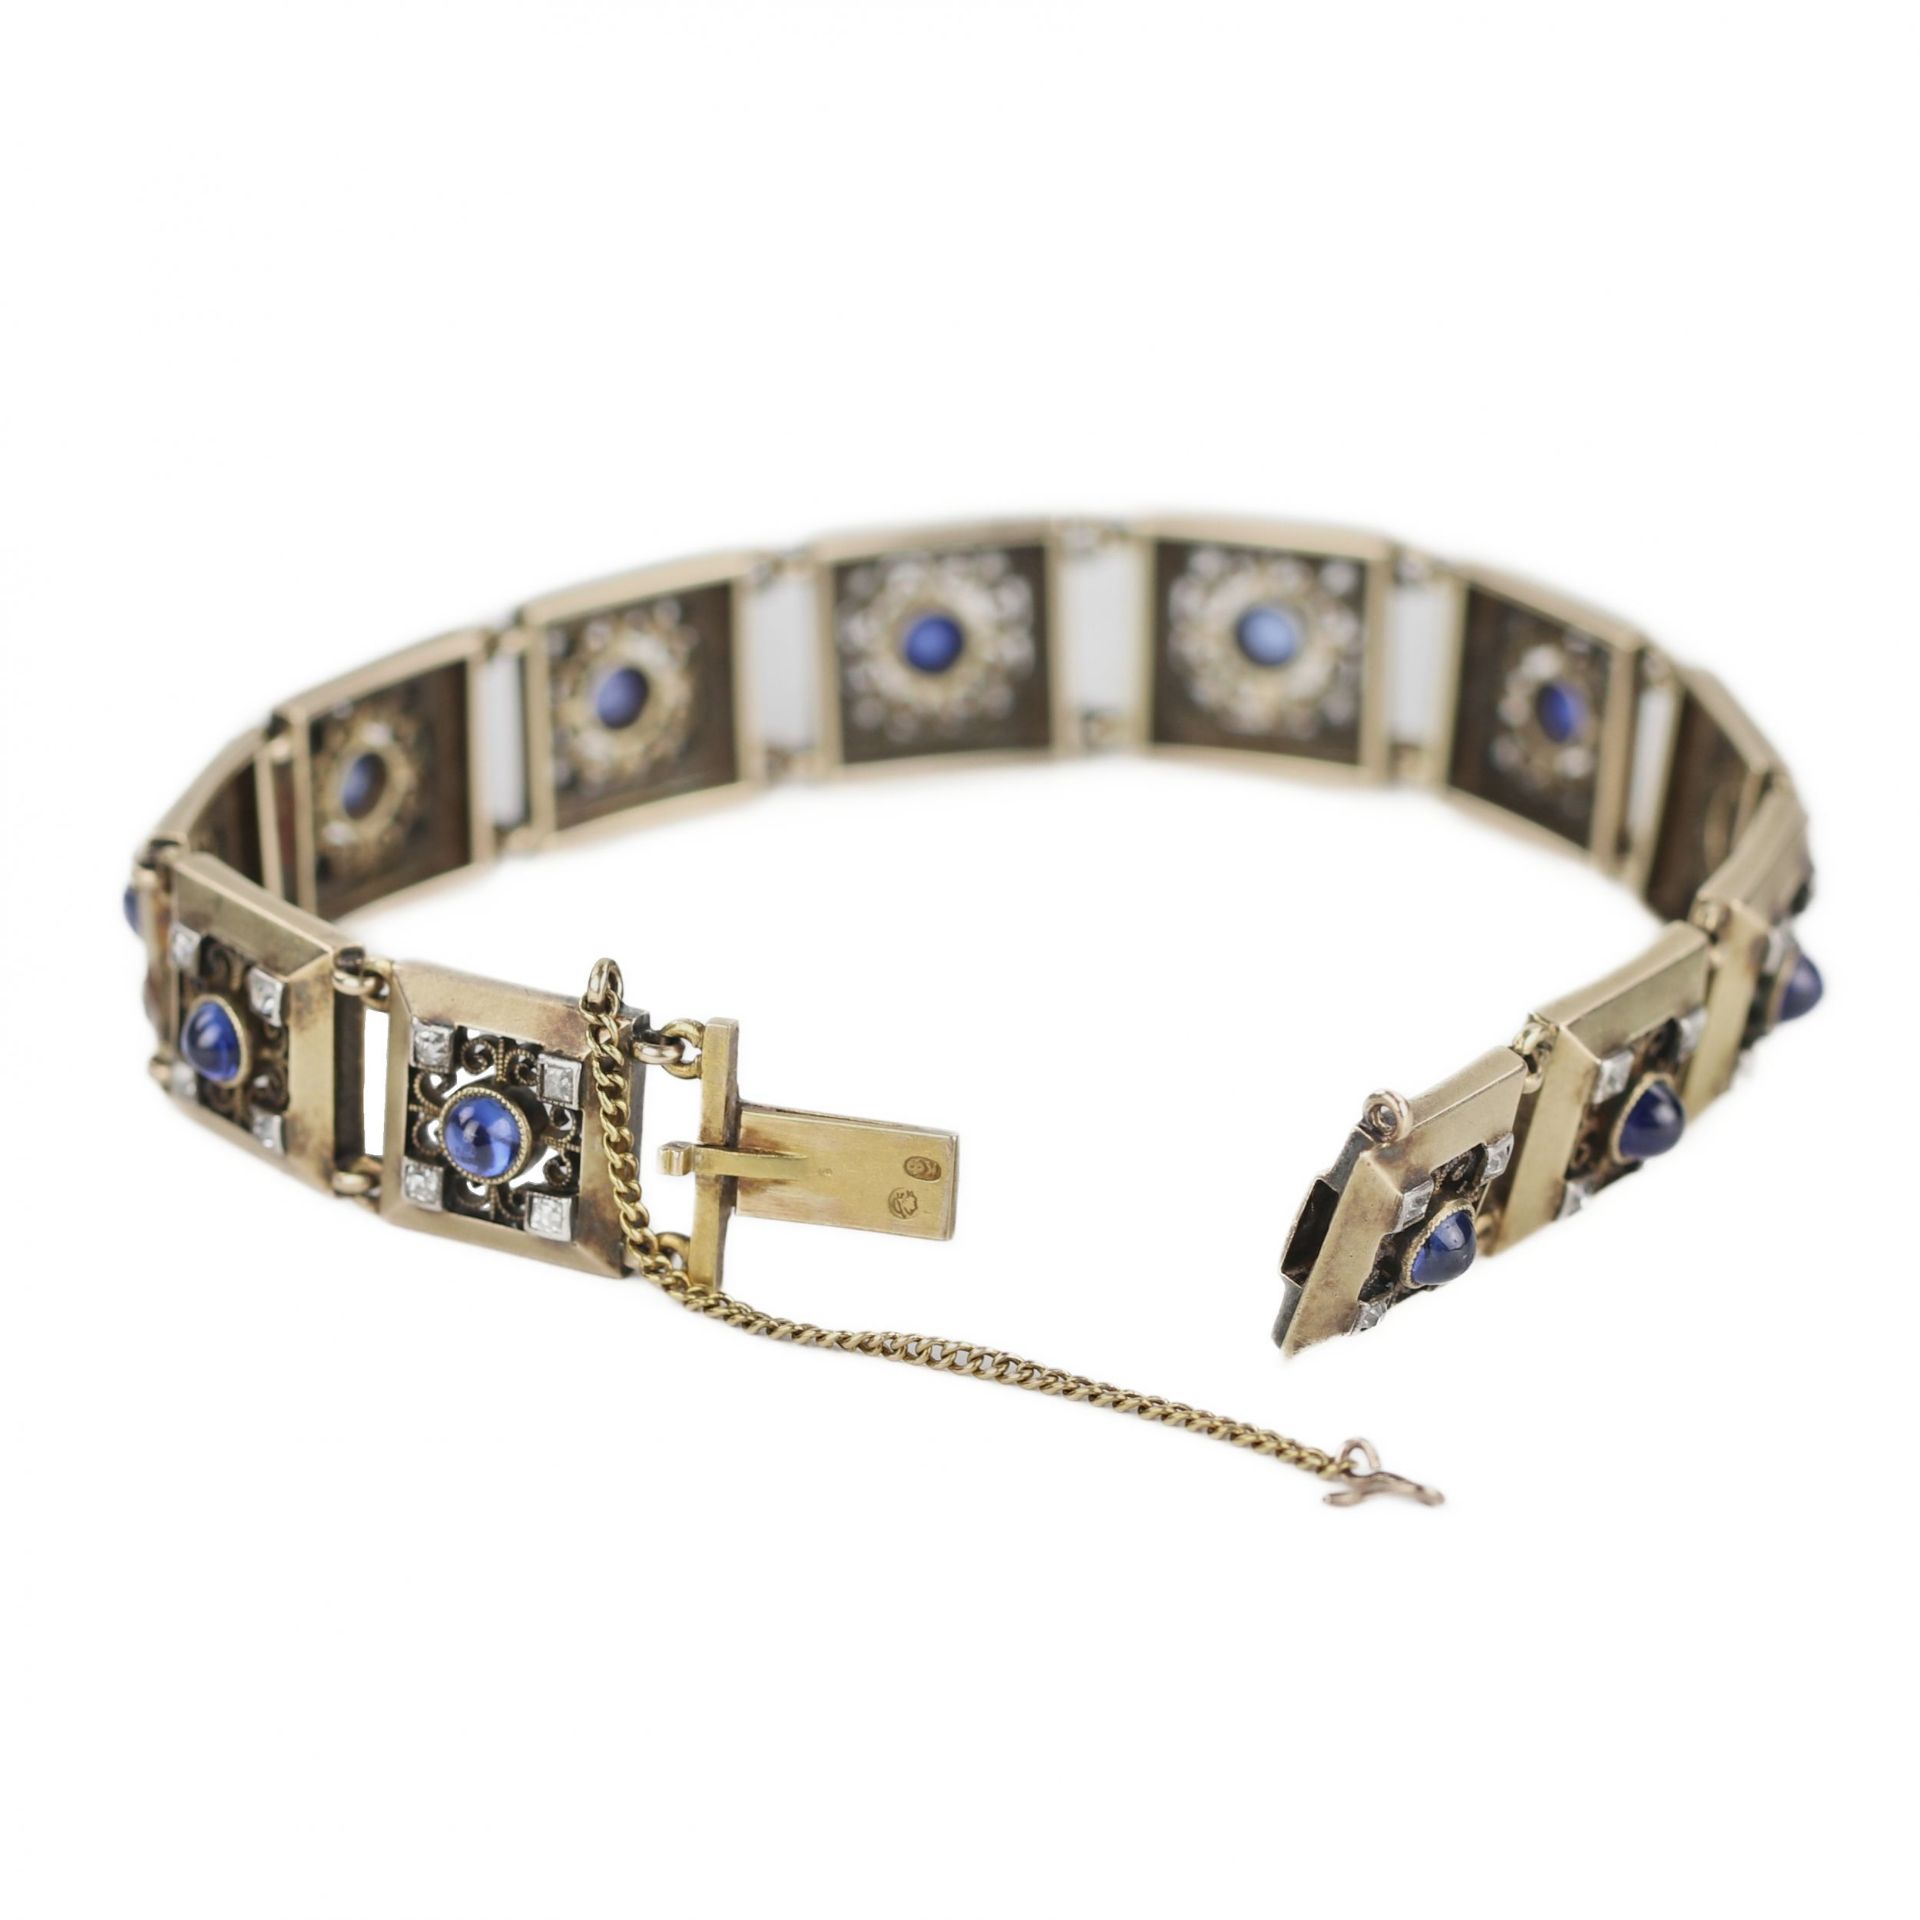 Elegant 56-carat Russian gold bracelet with sapphires and diamonds from Faberge firm. Moscow, Russia - Image 3 of 8